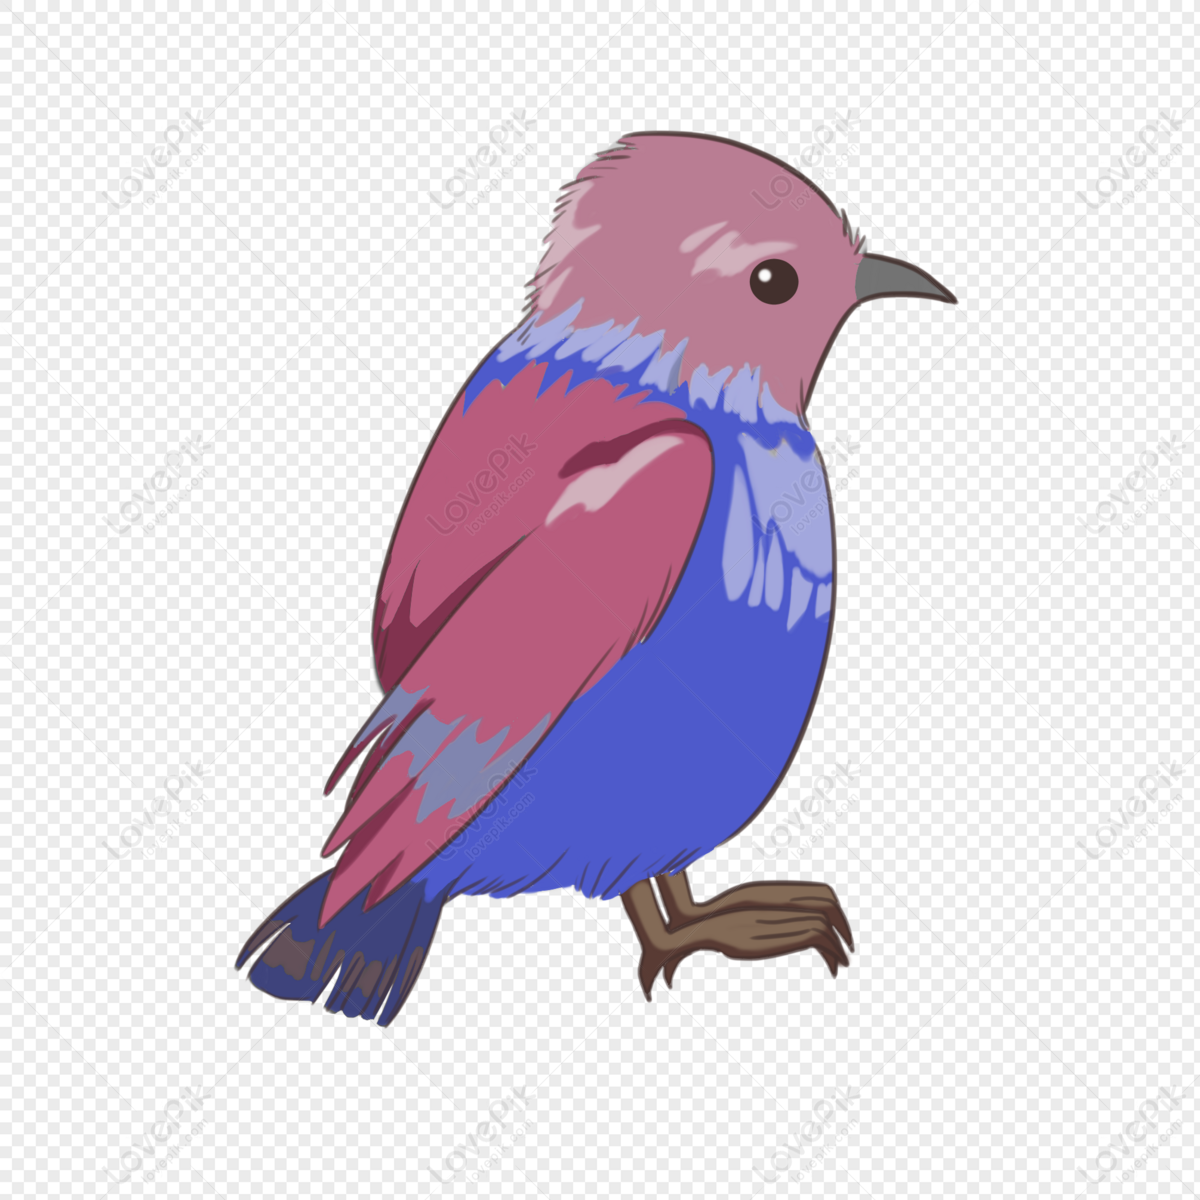 Side Bird 1 PNG Transparent Background And Clipart Image For Free Download  - Lovepik | 401230810